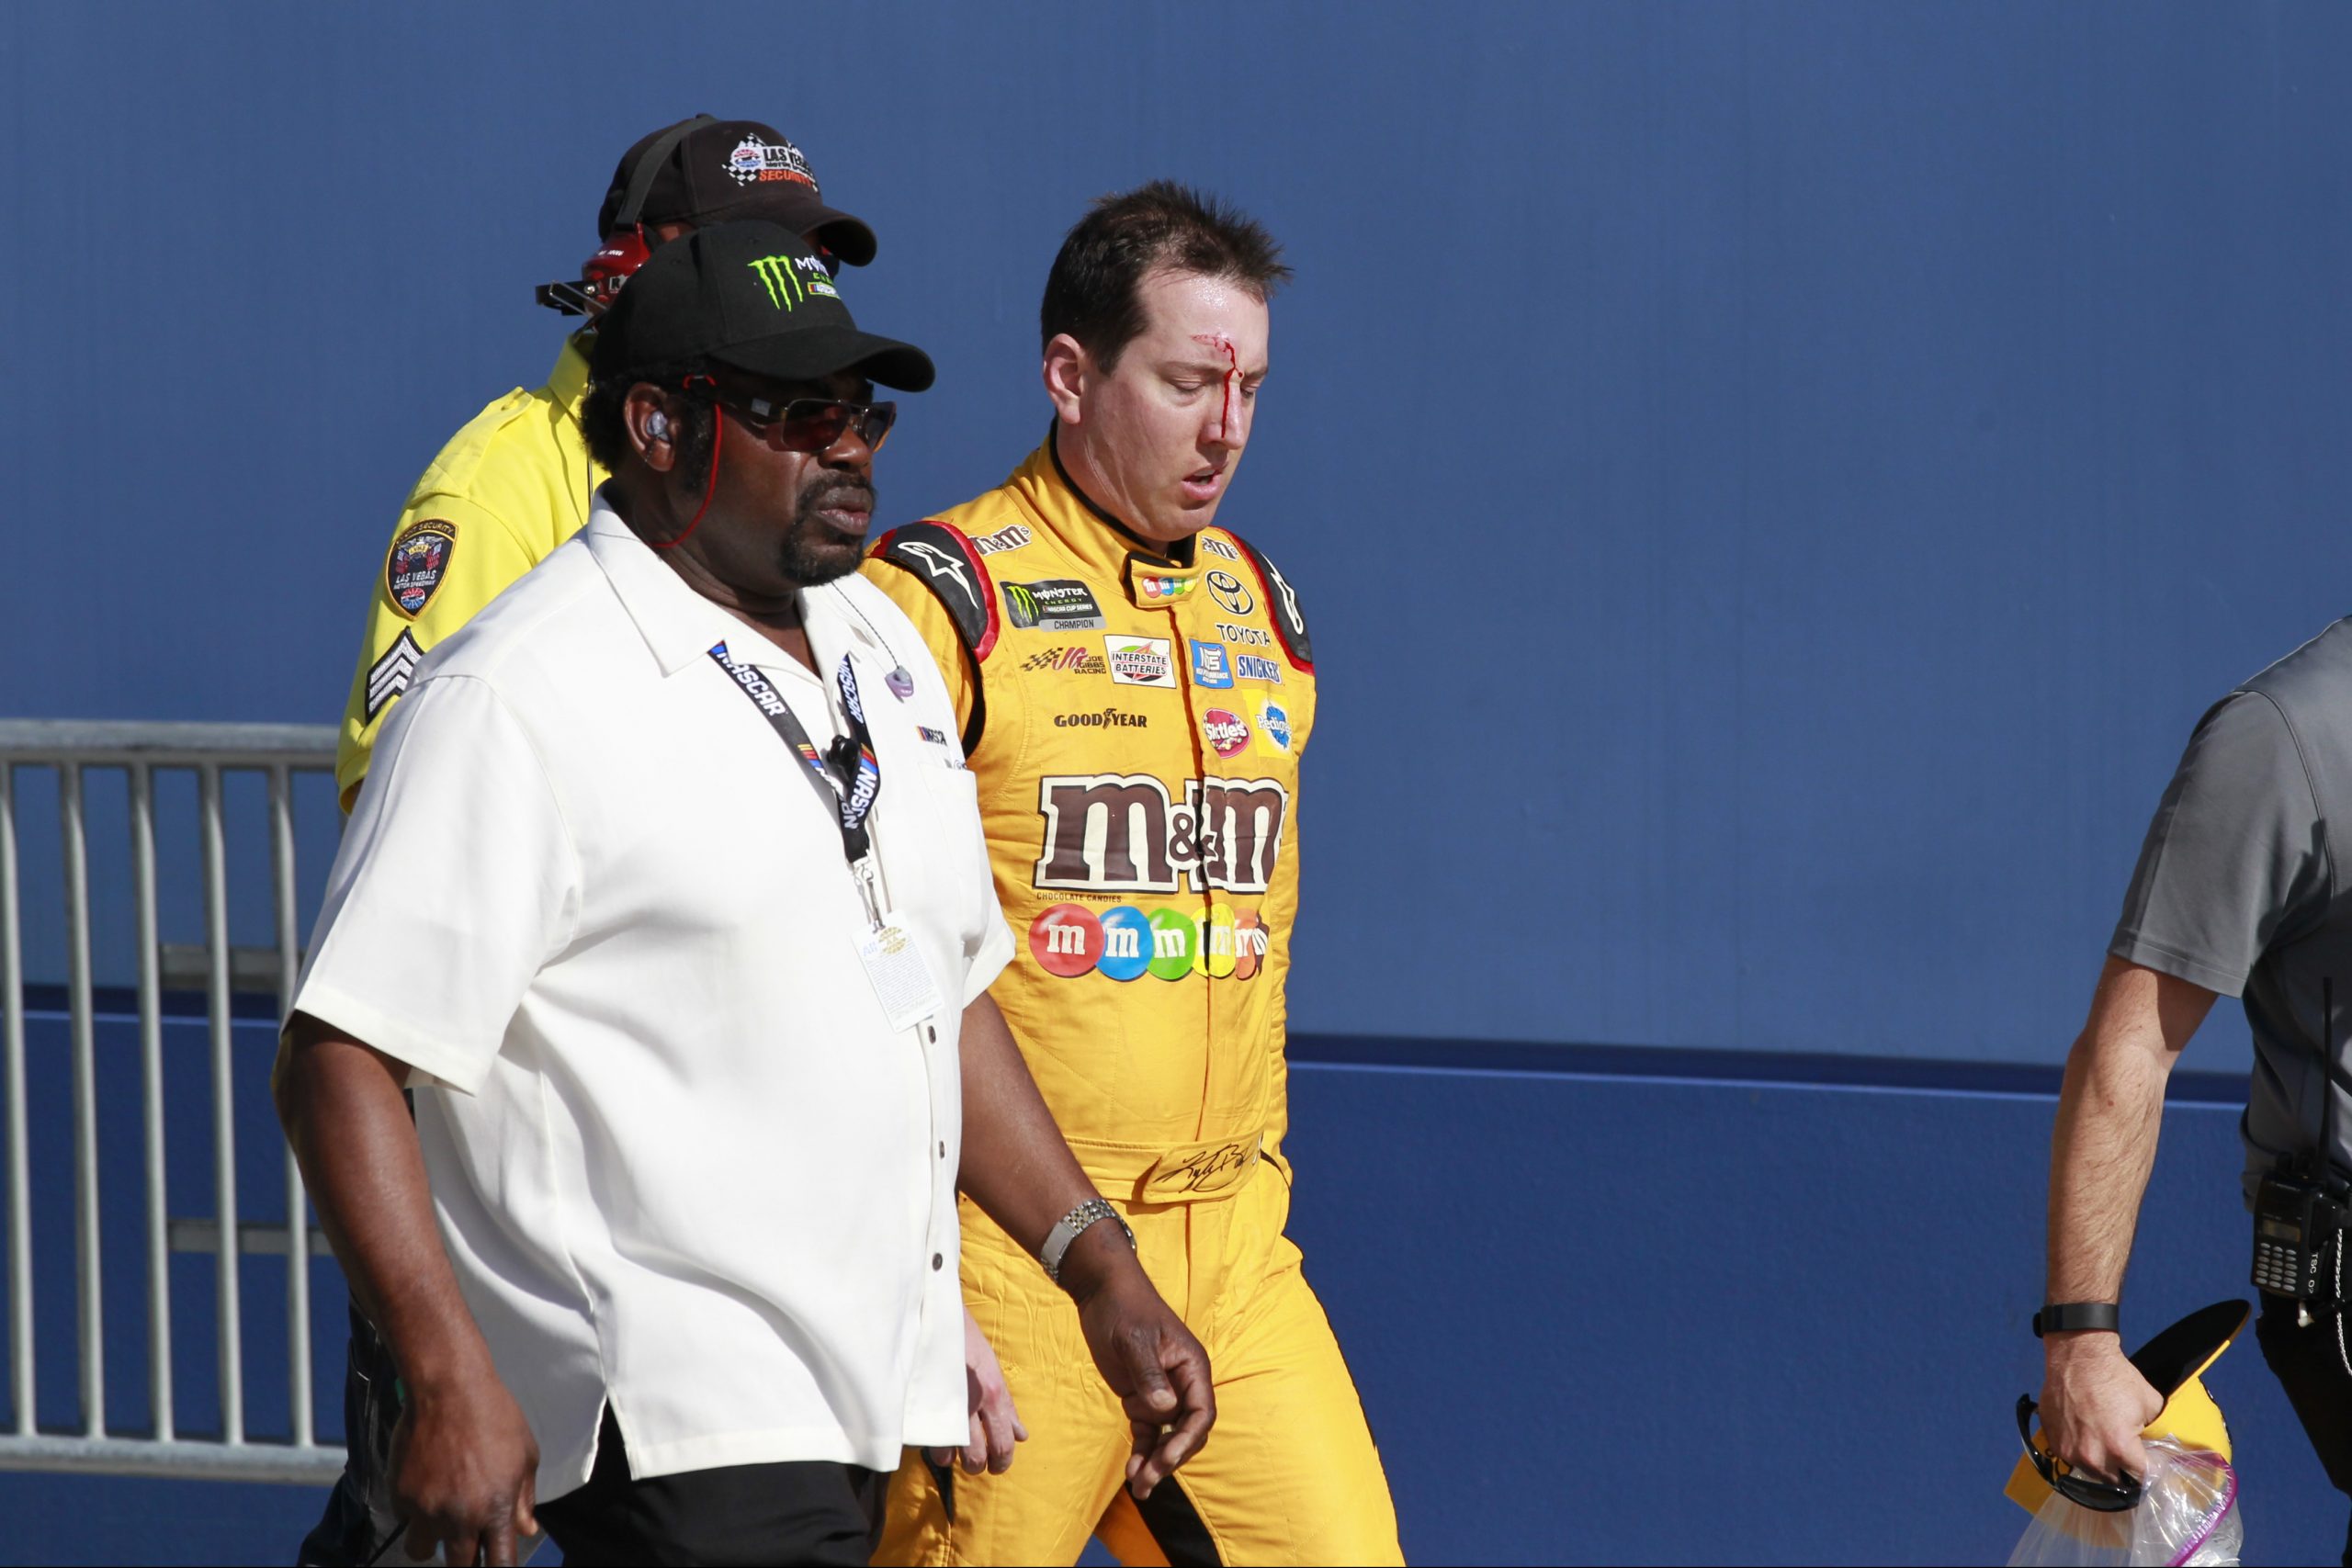 Kyle Busch walks away after fight with Joey Logano